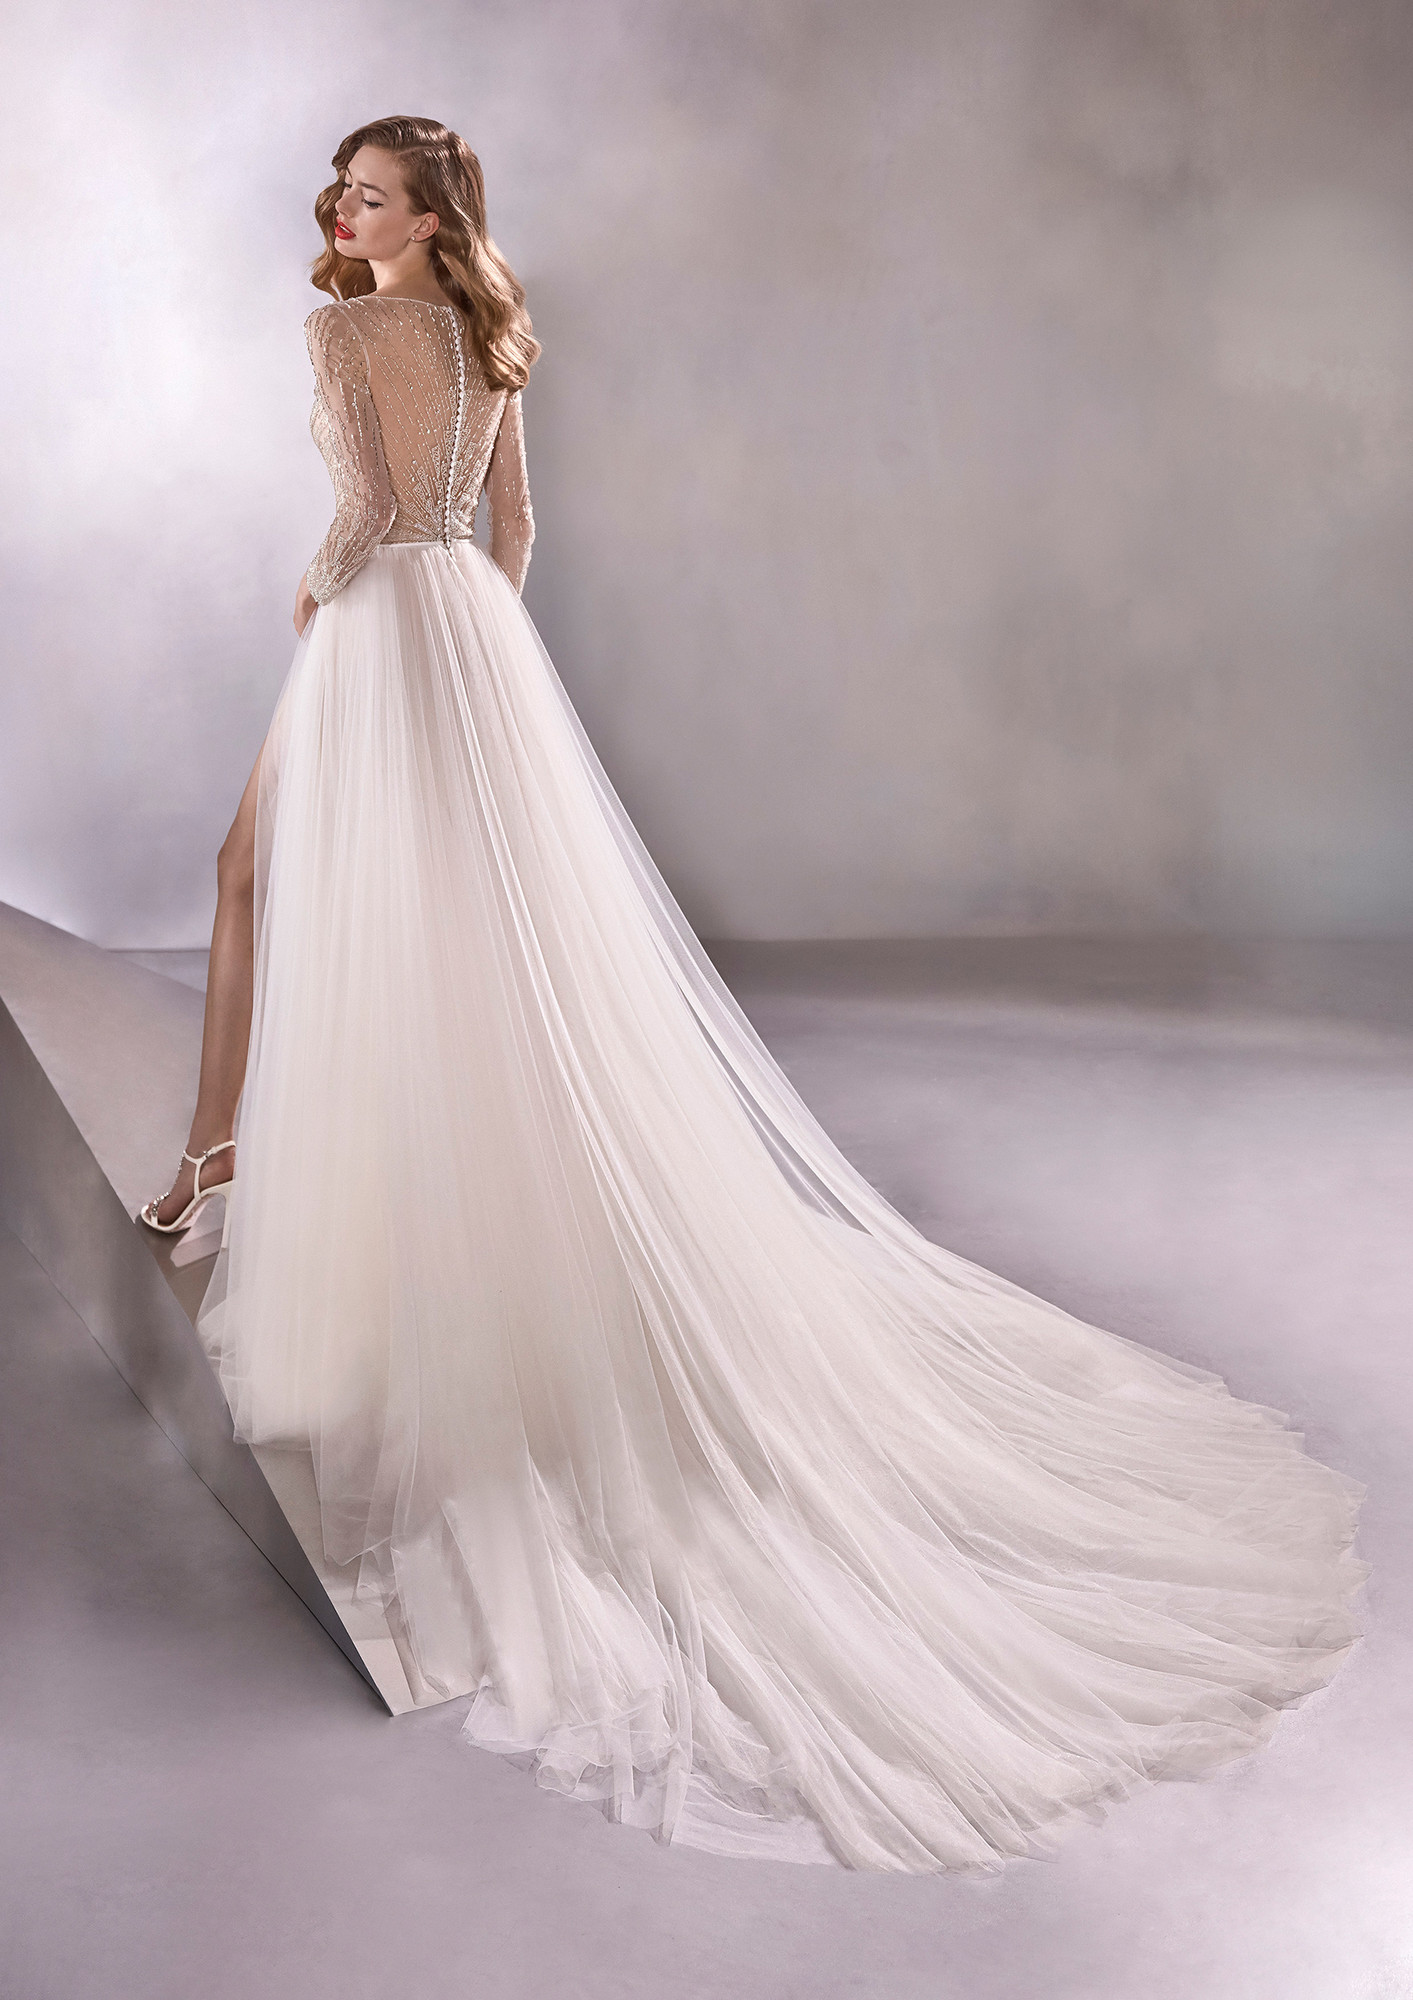 WANDERING Wedding Dress from Atelier Pronovias - hitched.co.uk